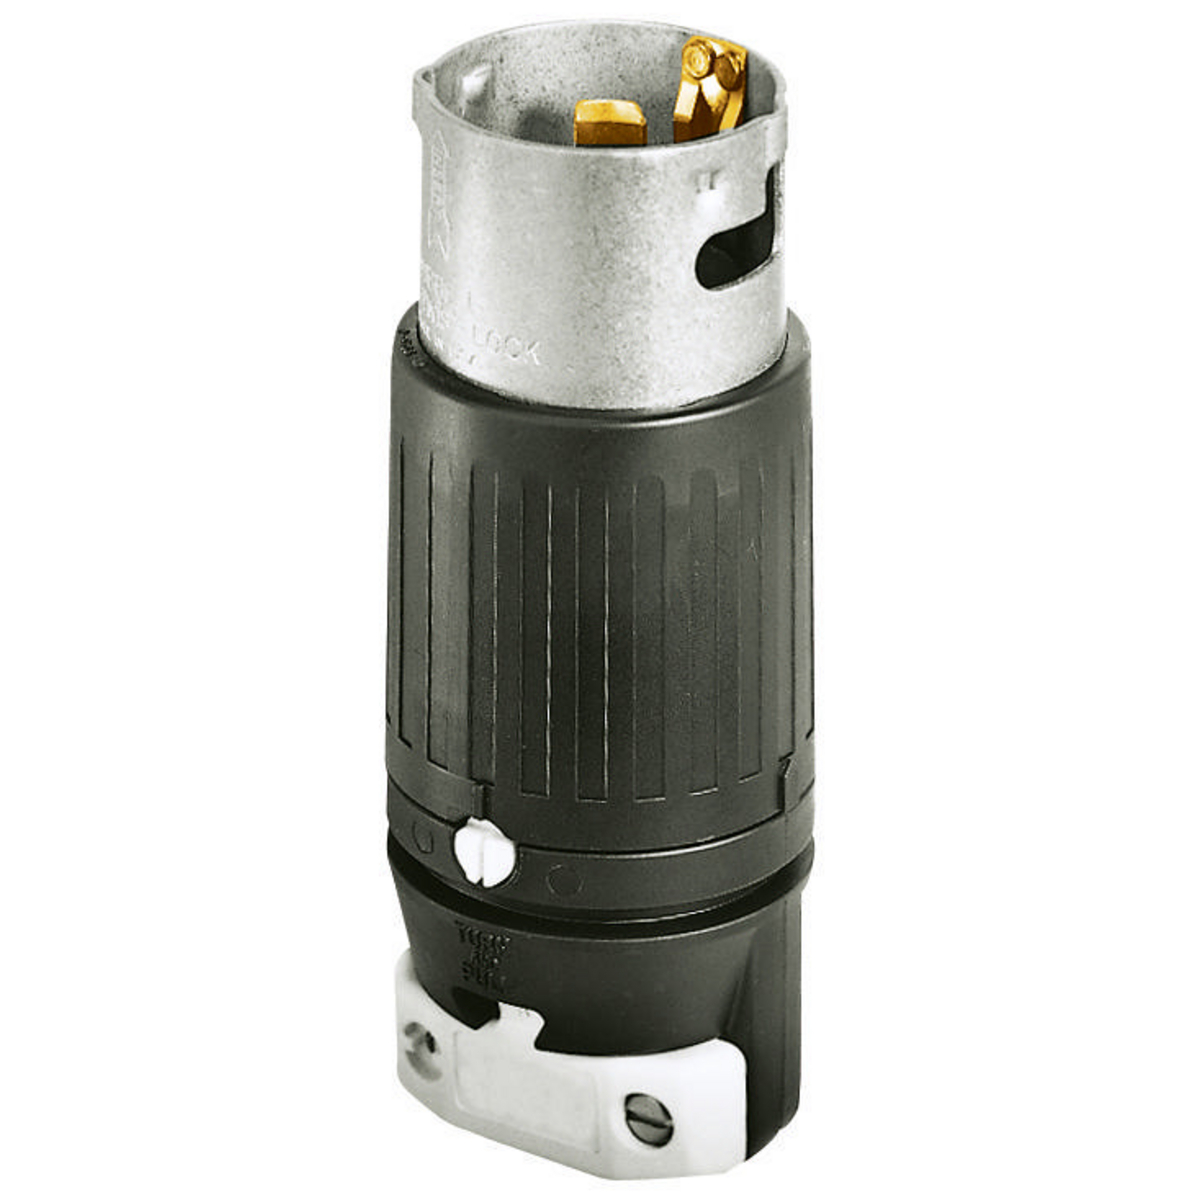 CS6365C for sale online Hubbell 50A C Locking Plug 